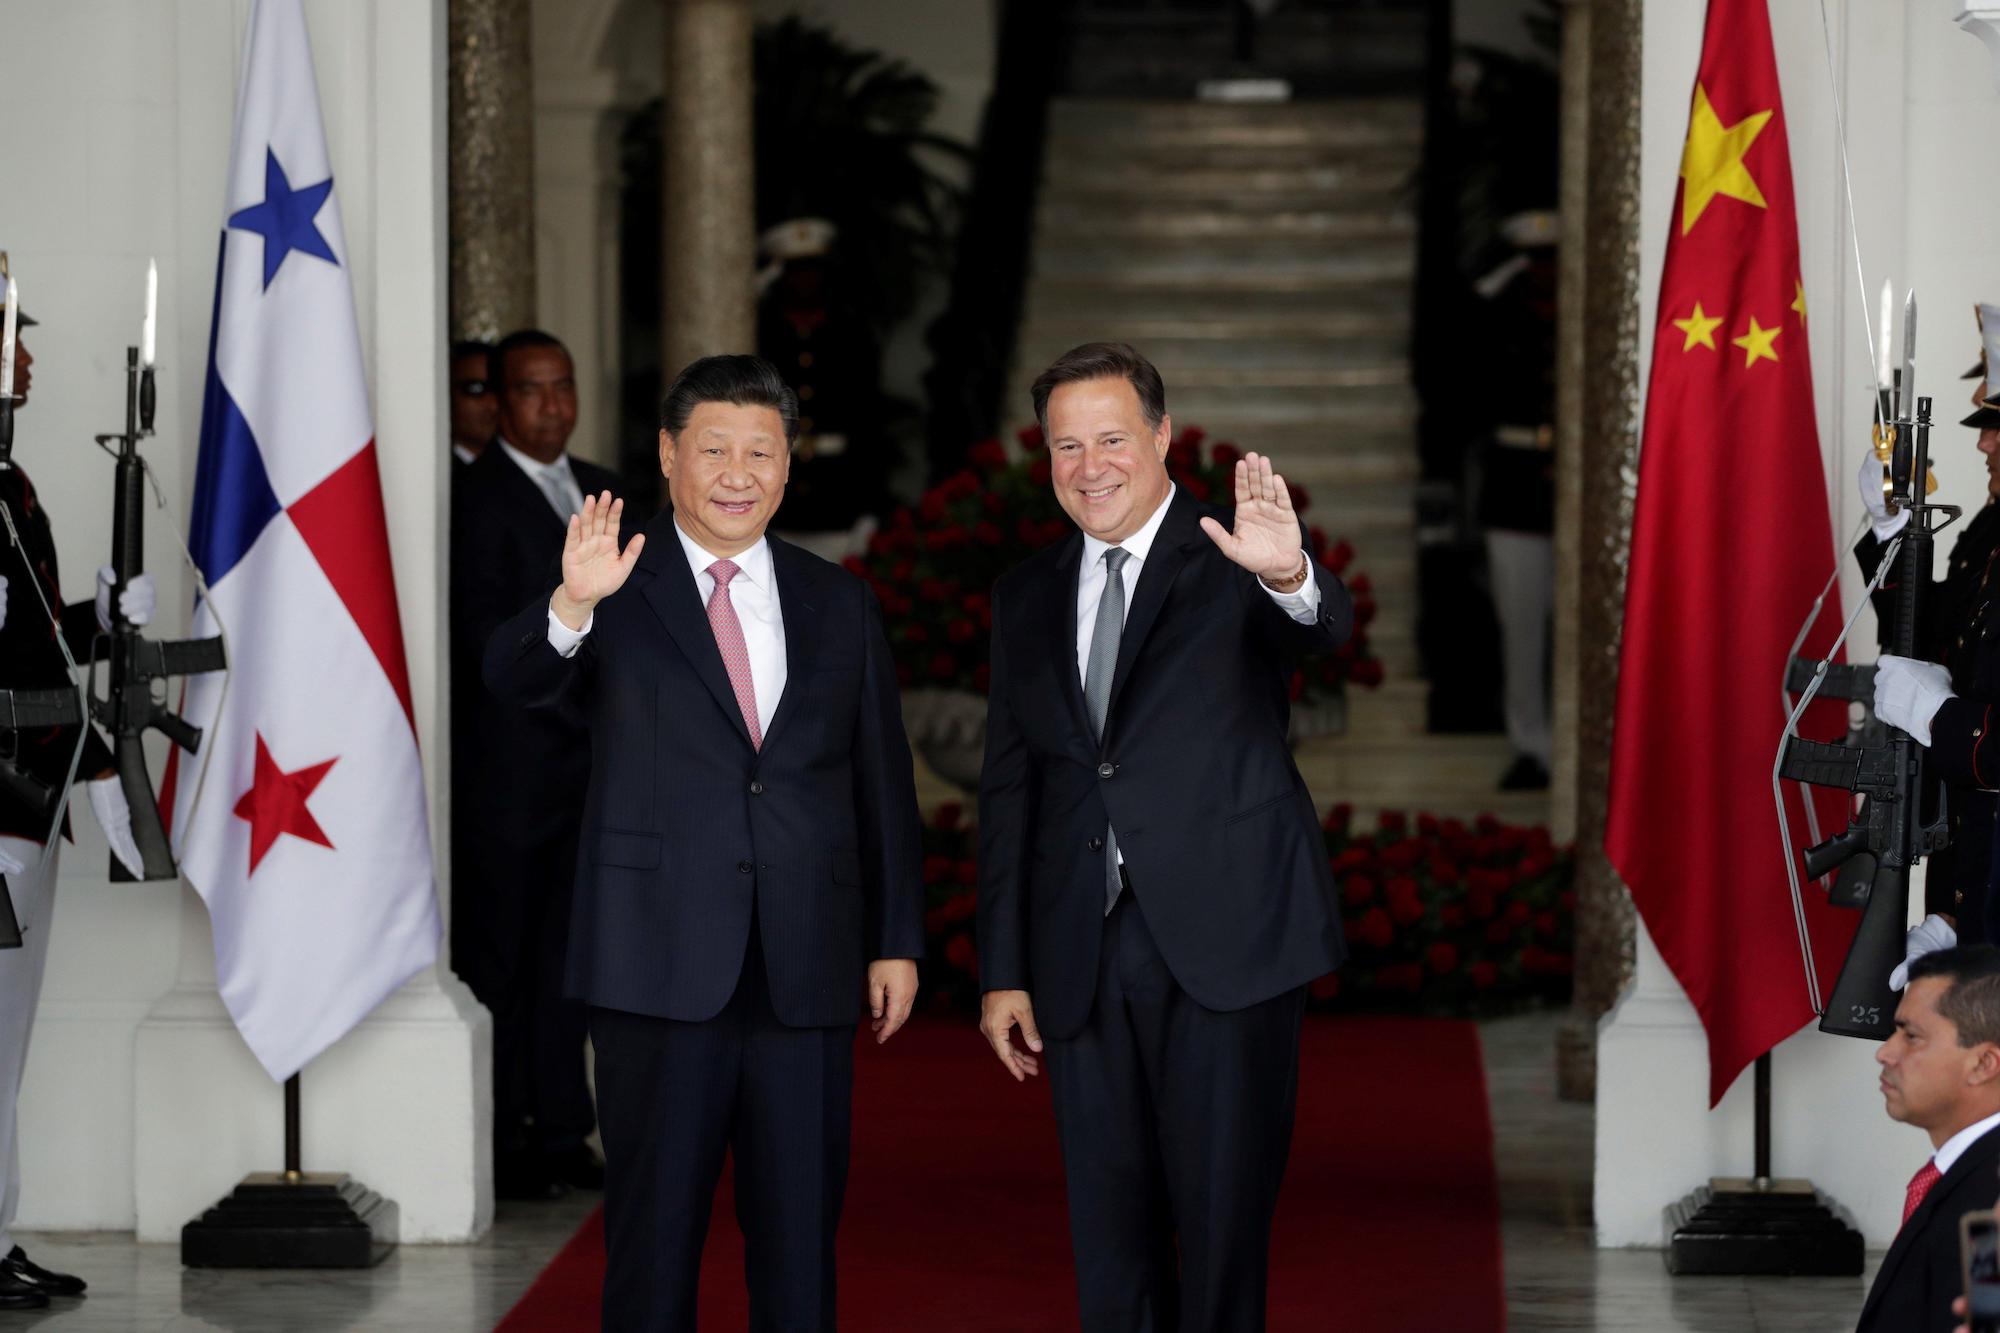 Juan Carlos Varela and Xi Jinping greeting each other, with Panamanian and Chinese flags on either side.